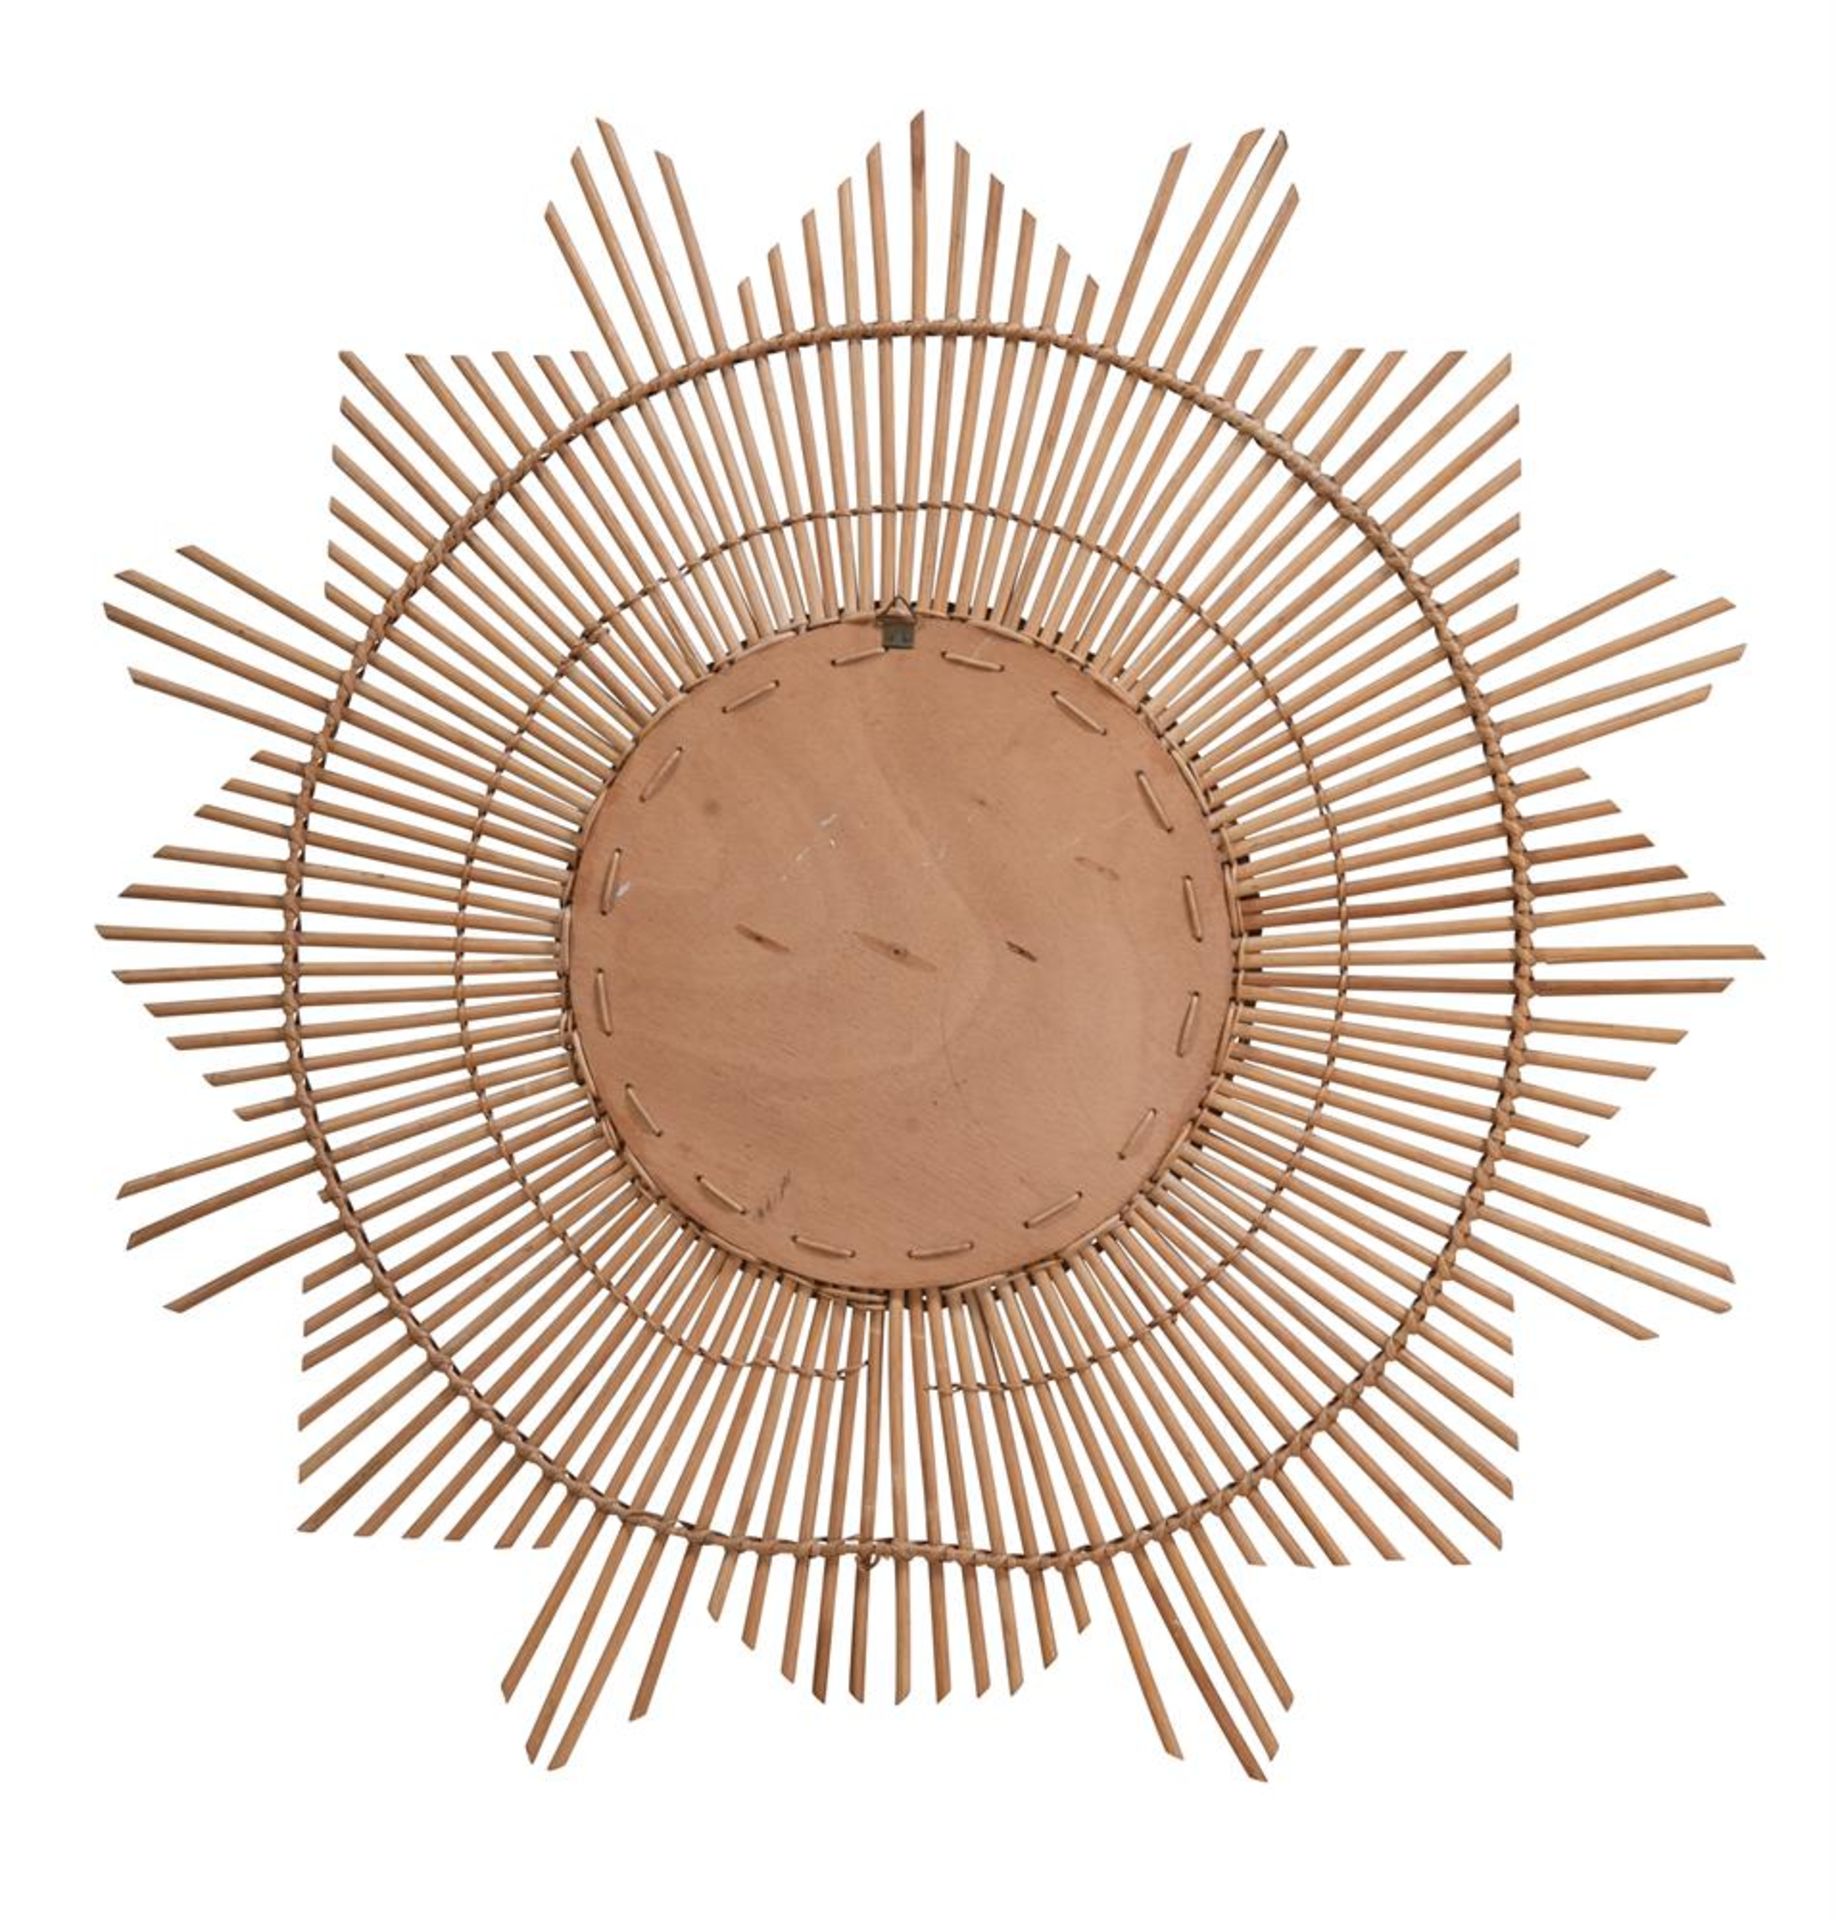 A FRENCH RATTAN MIRROR, CIRCA 1960 - Image 3 of 3